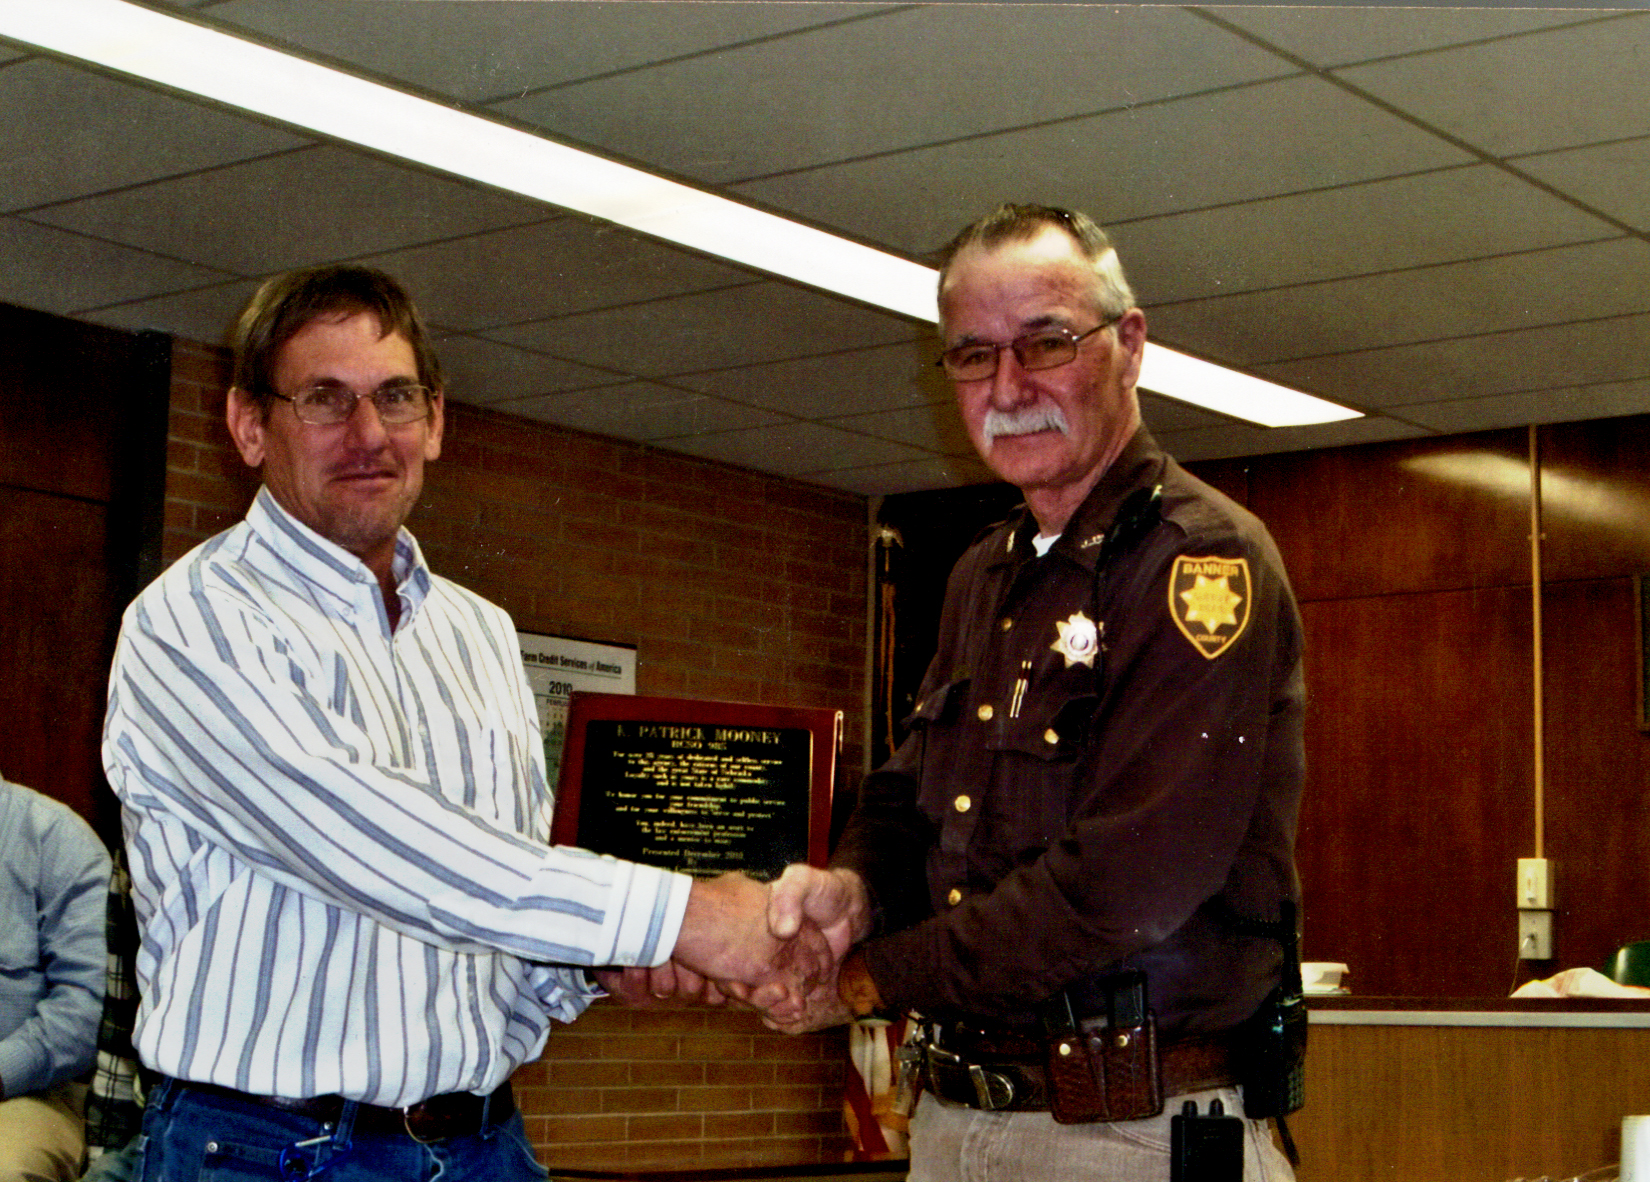 Bob Gifford Honors Sheriff Pat Mooney for 28 Years of Service